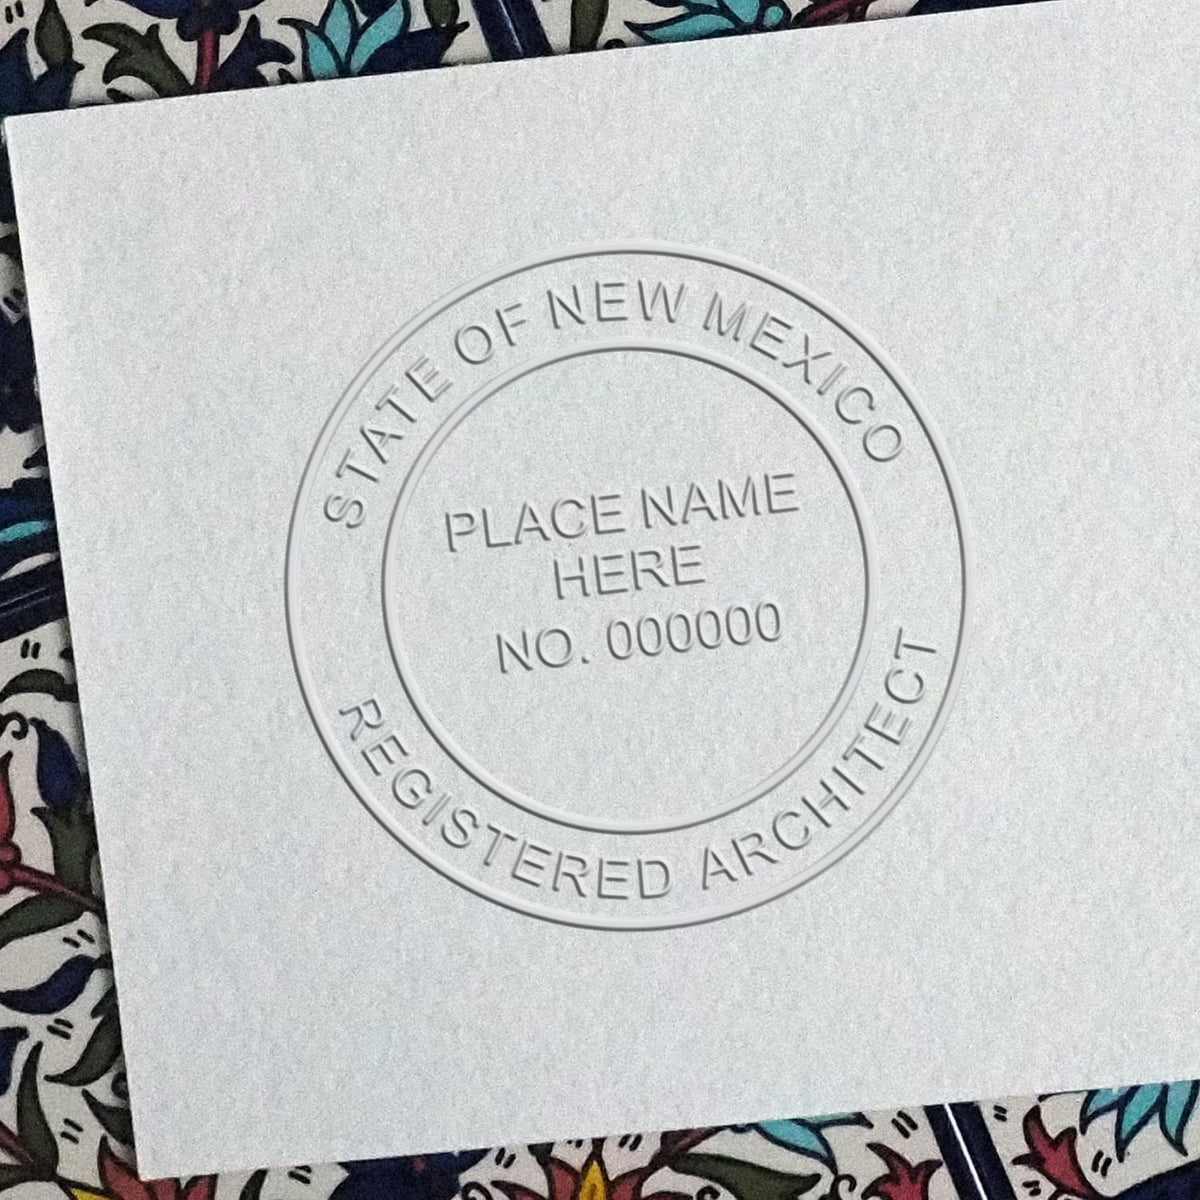 The State of New Mexico Architectural Seal Embosser stamp impression comes to life with a crisp, detailed photo on paper - showcasing true professional quality.